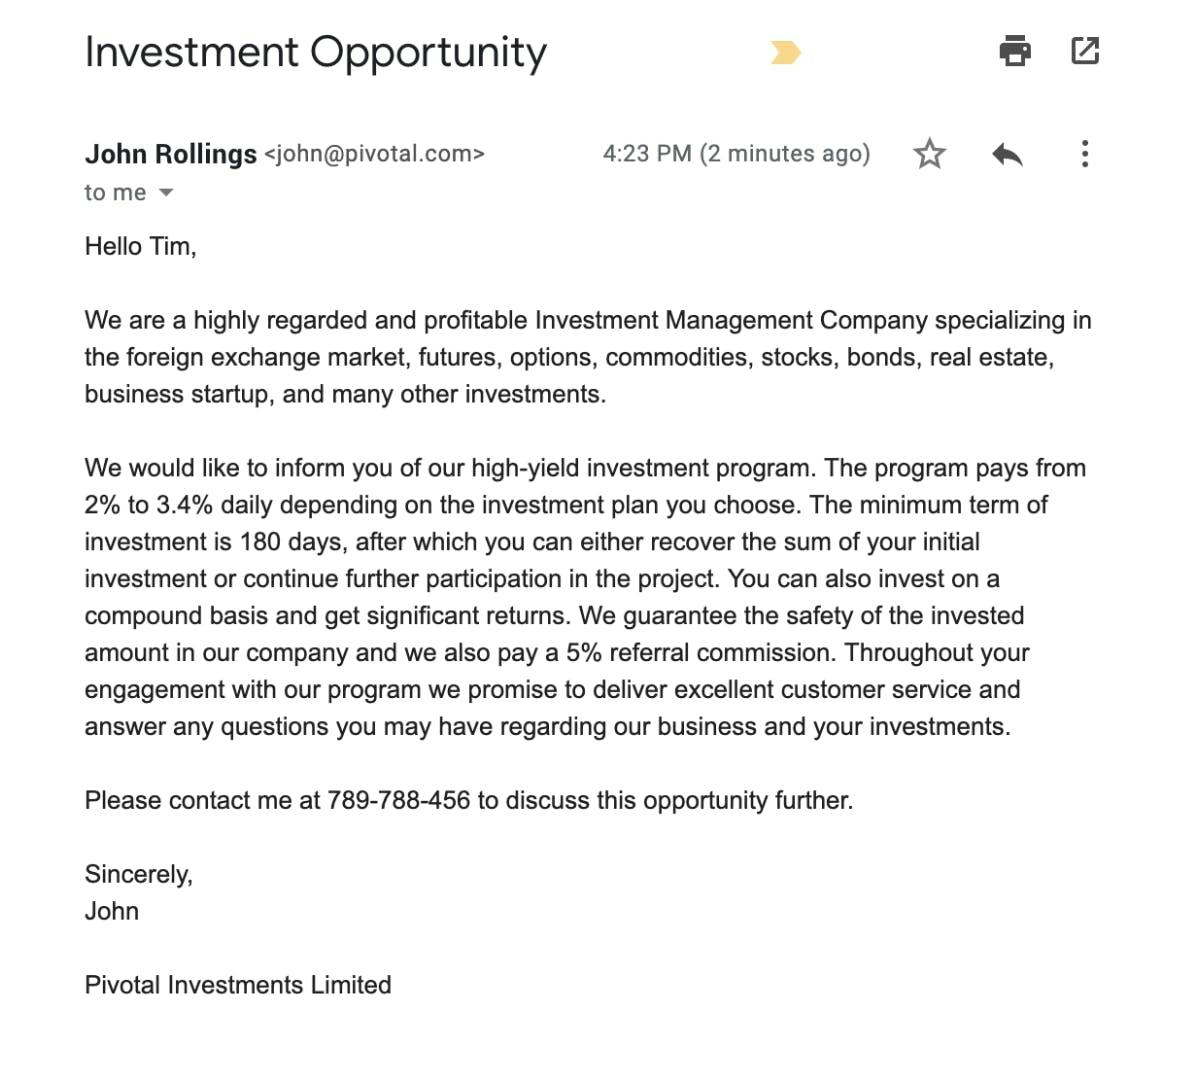 fraudulent investment opportunity email